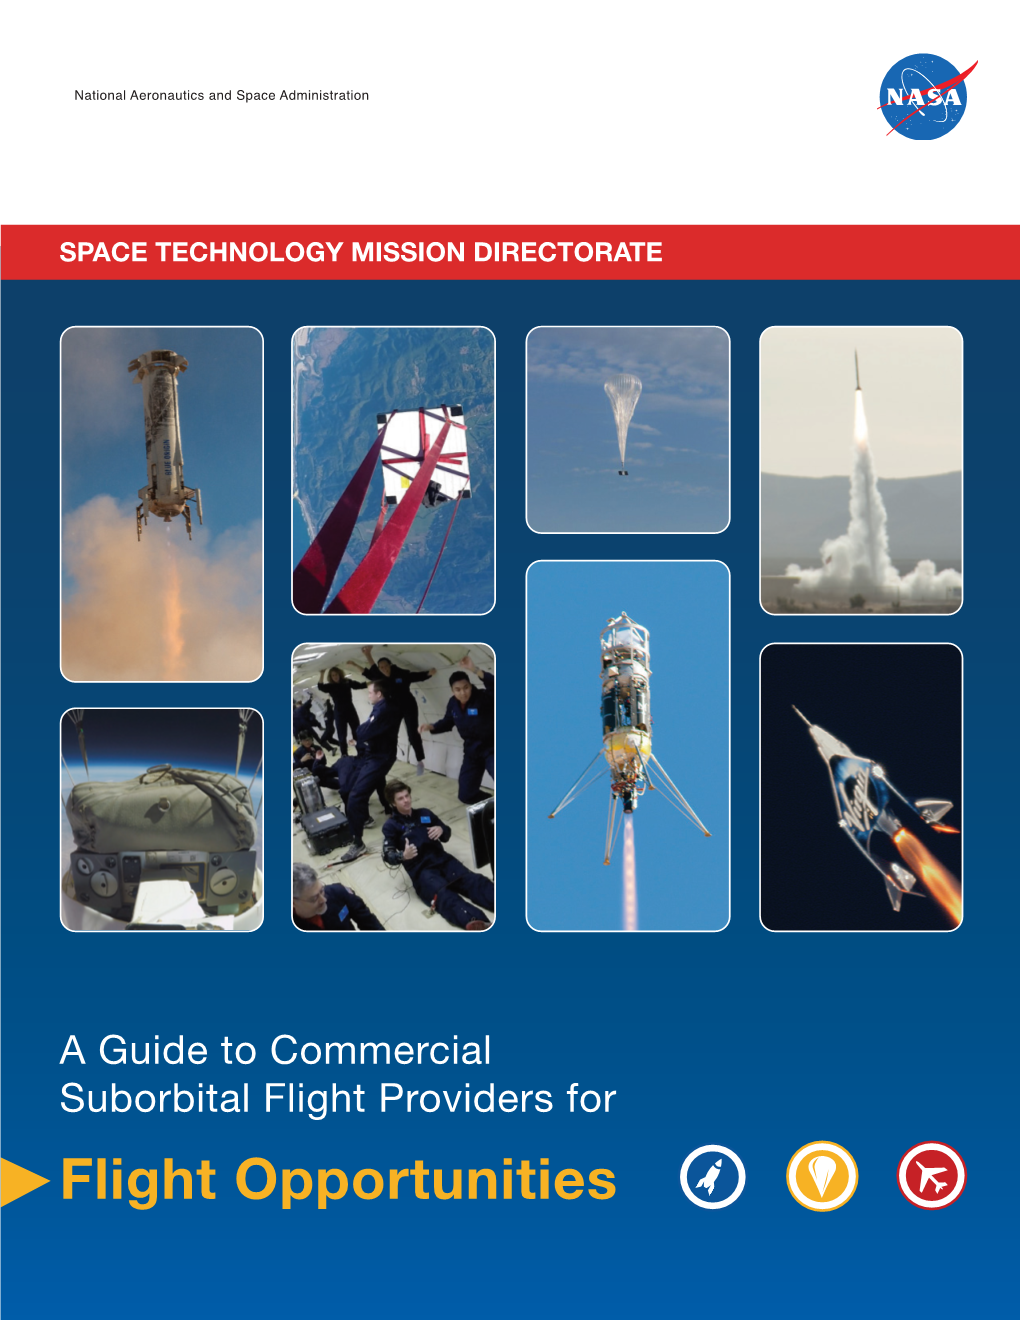 Guide to Commercial Suborbital Flight Providers for Flight Opportunities About Flight Opportunities